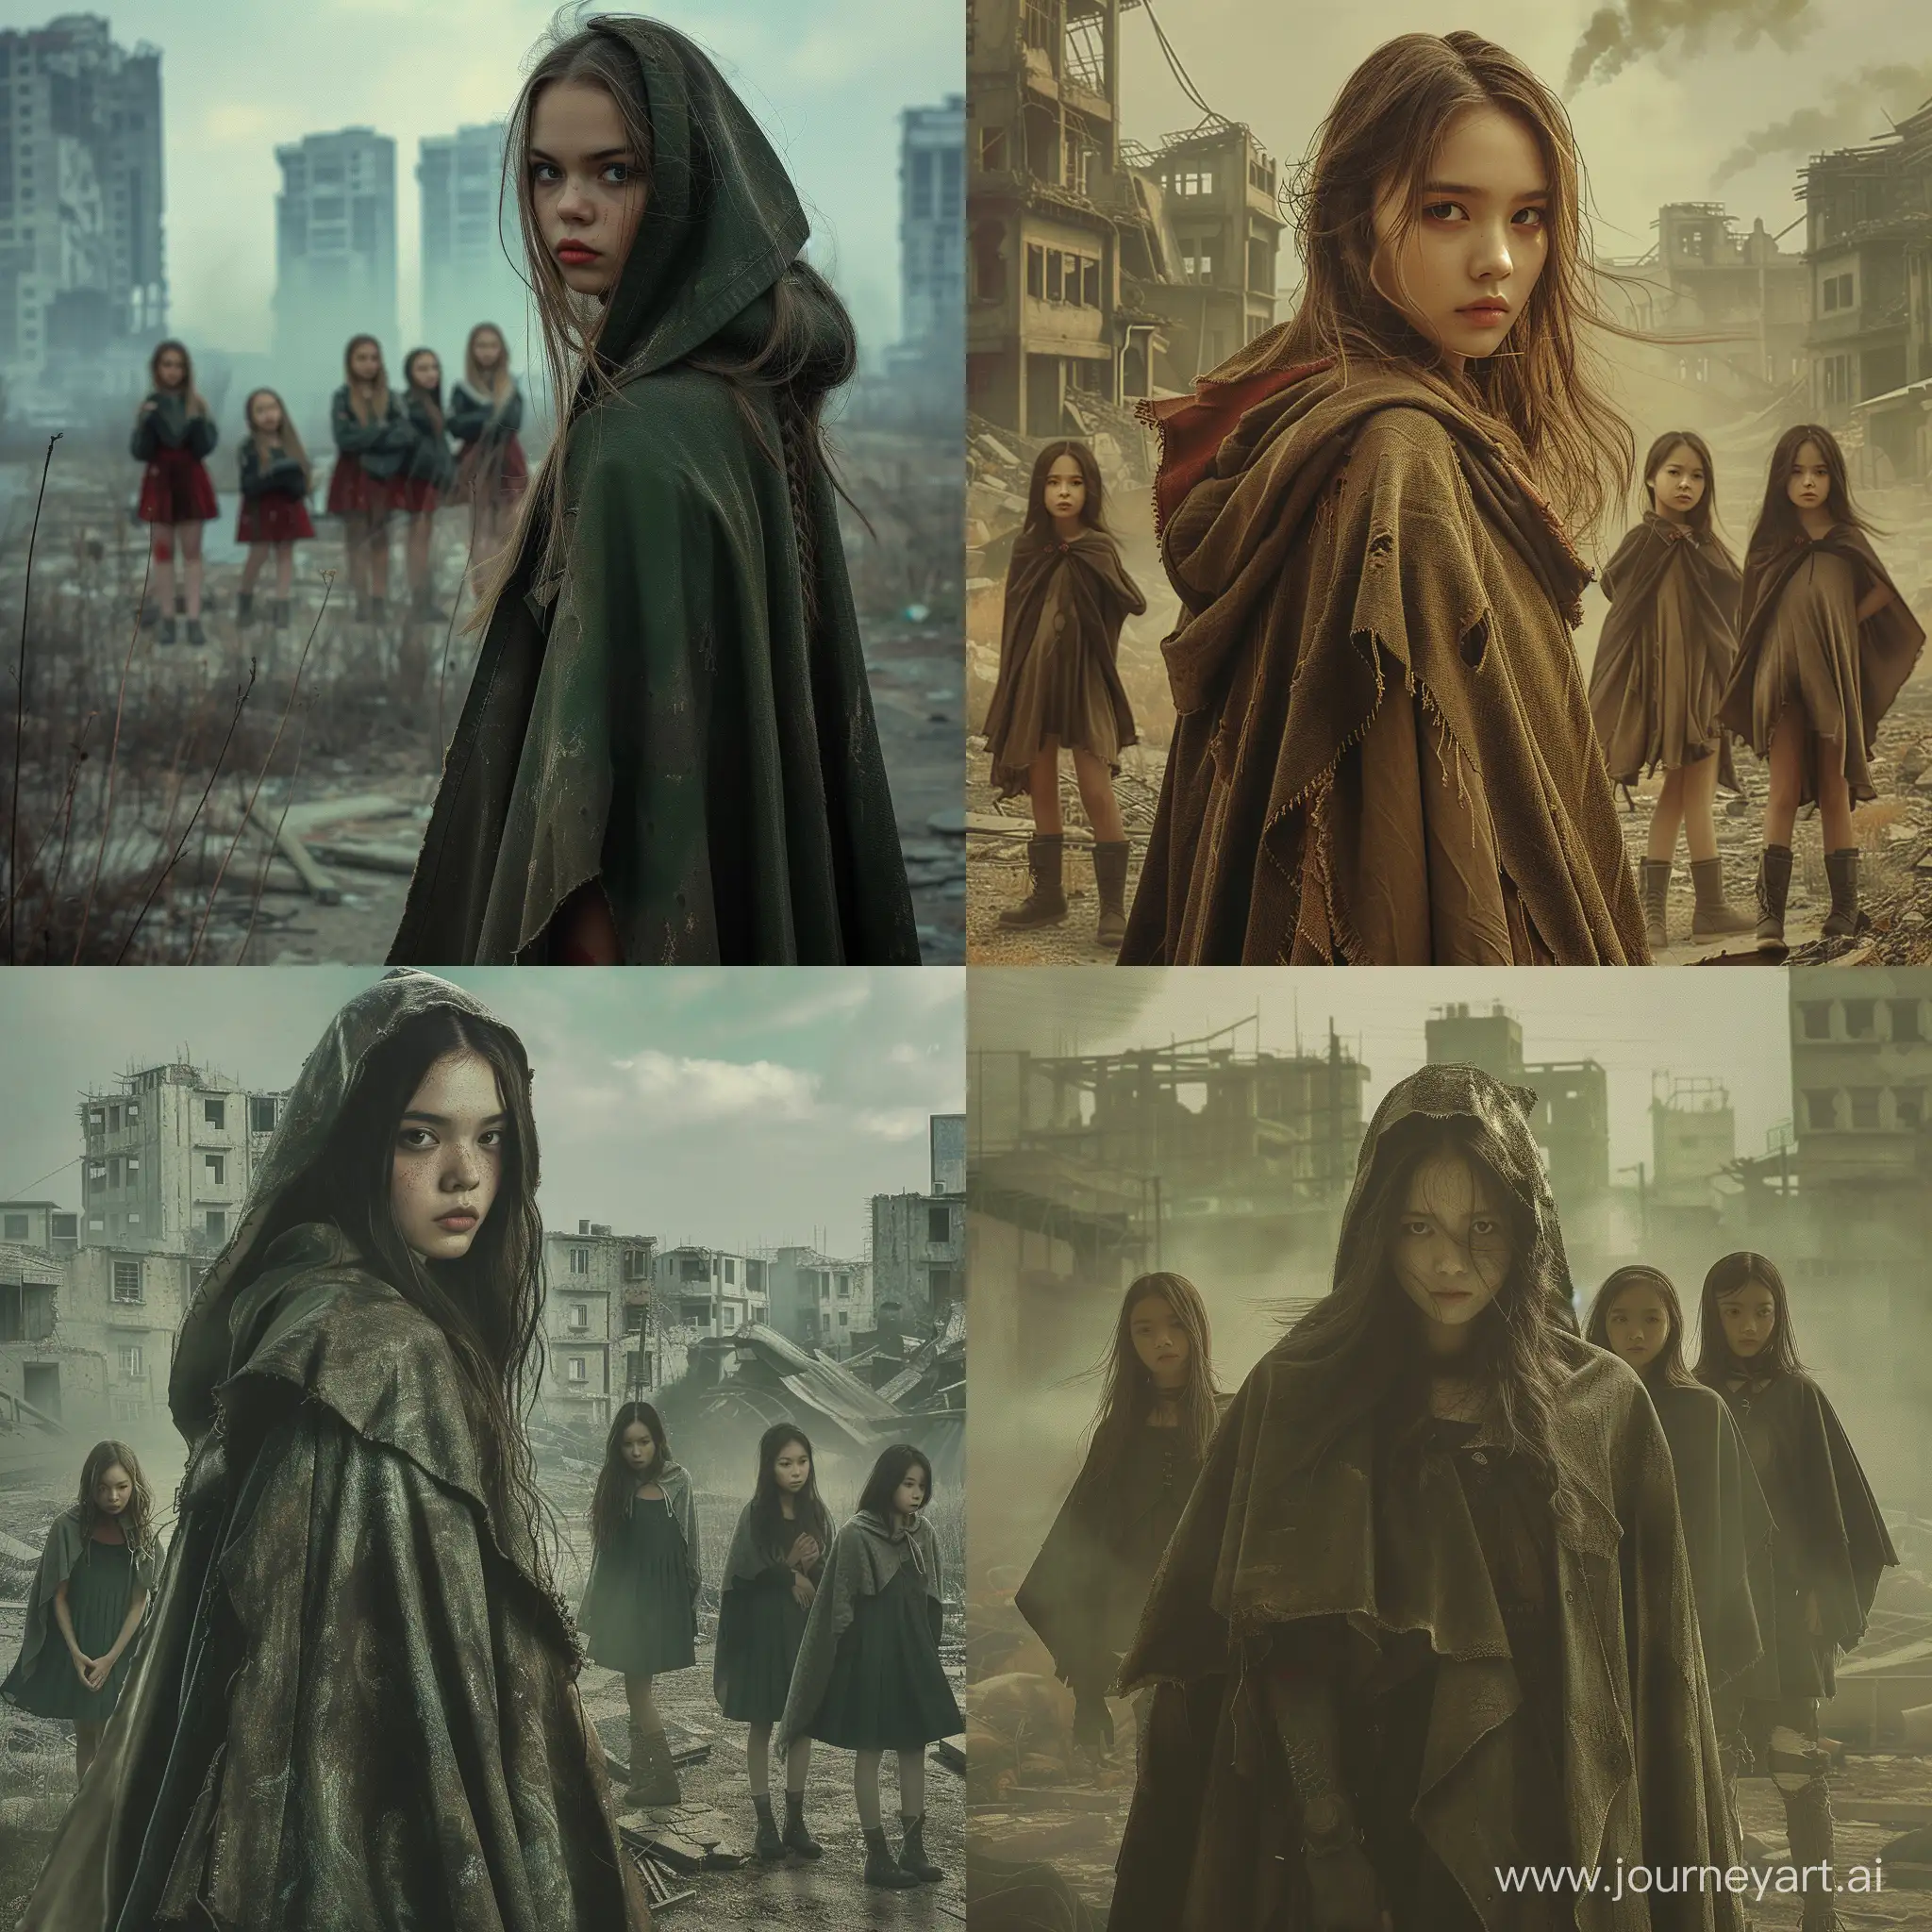 PostApocalyptic-City-Enigmatic-Woman-in-Cloak-Amidst-Five-Girls-Music-Album-Cover